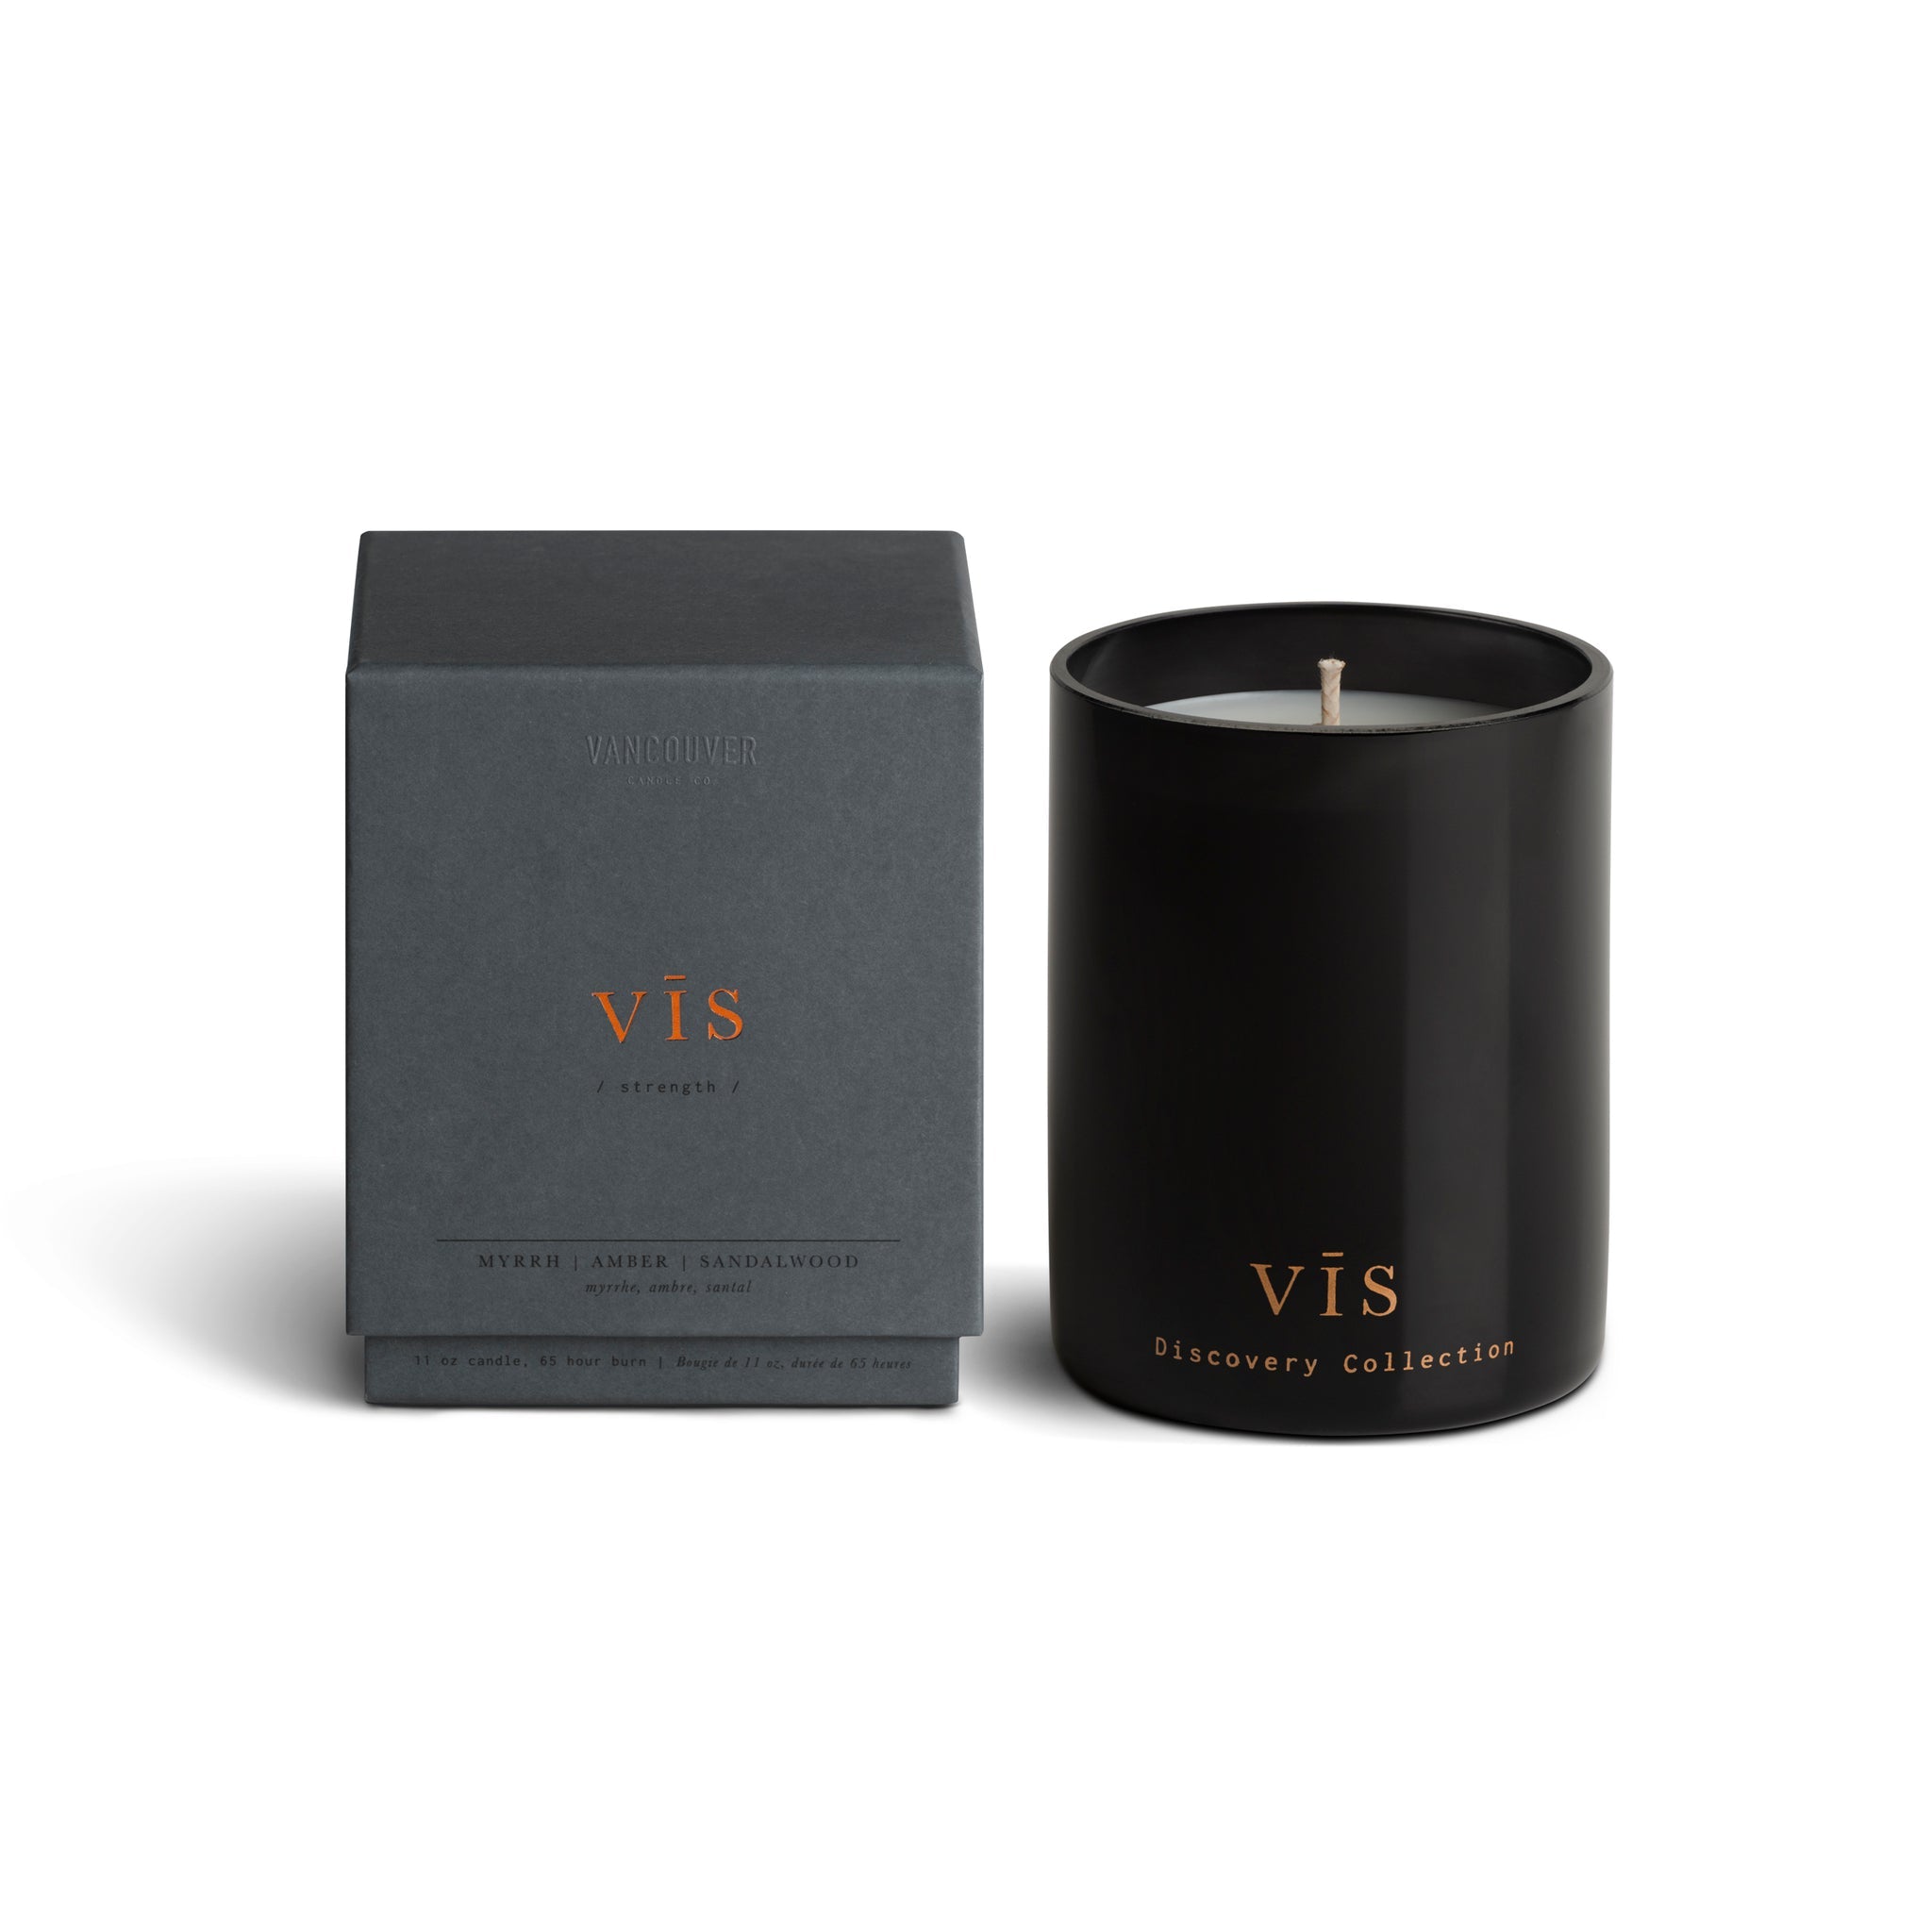  Vis (Strength), Discovery Collection Vancouver Candle Co. Perfumarie